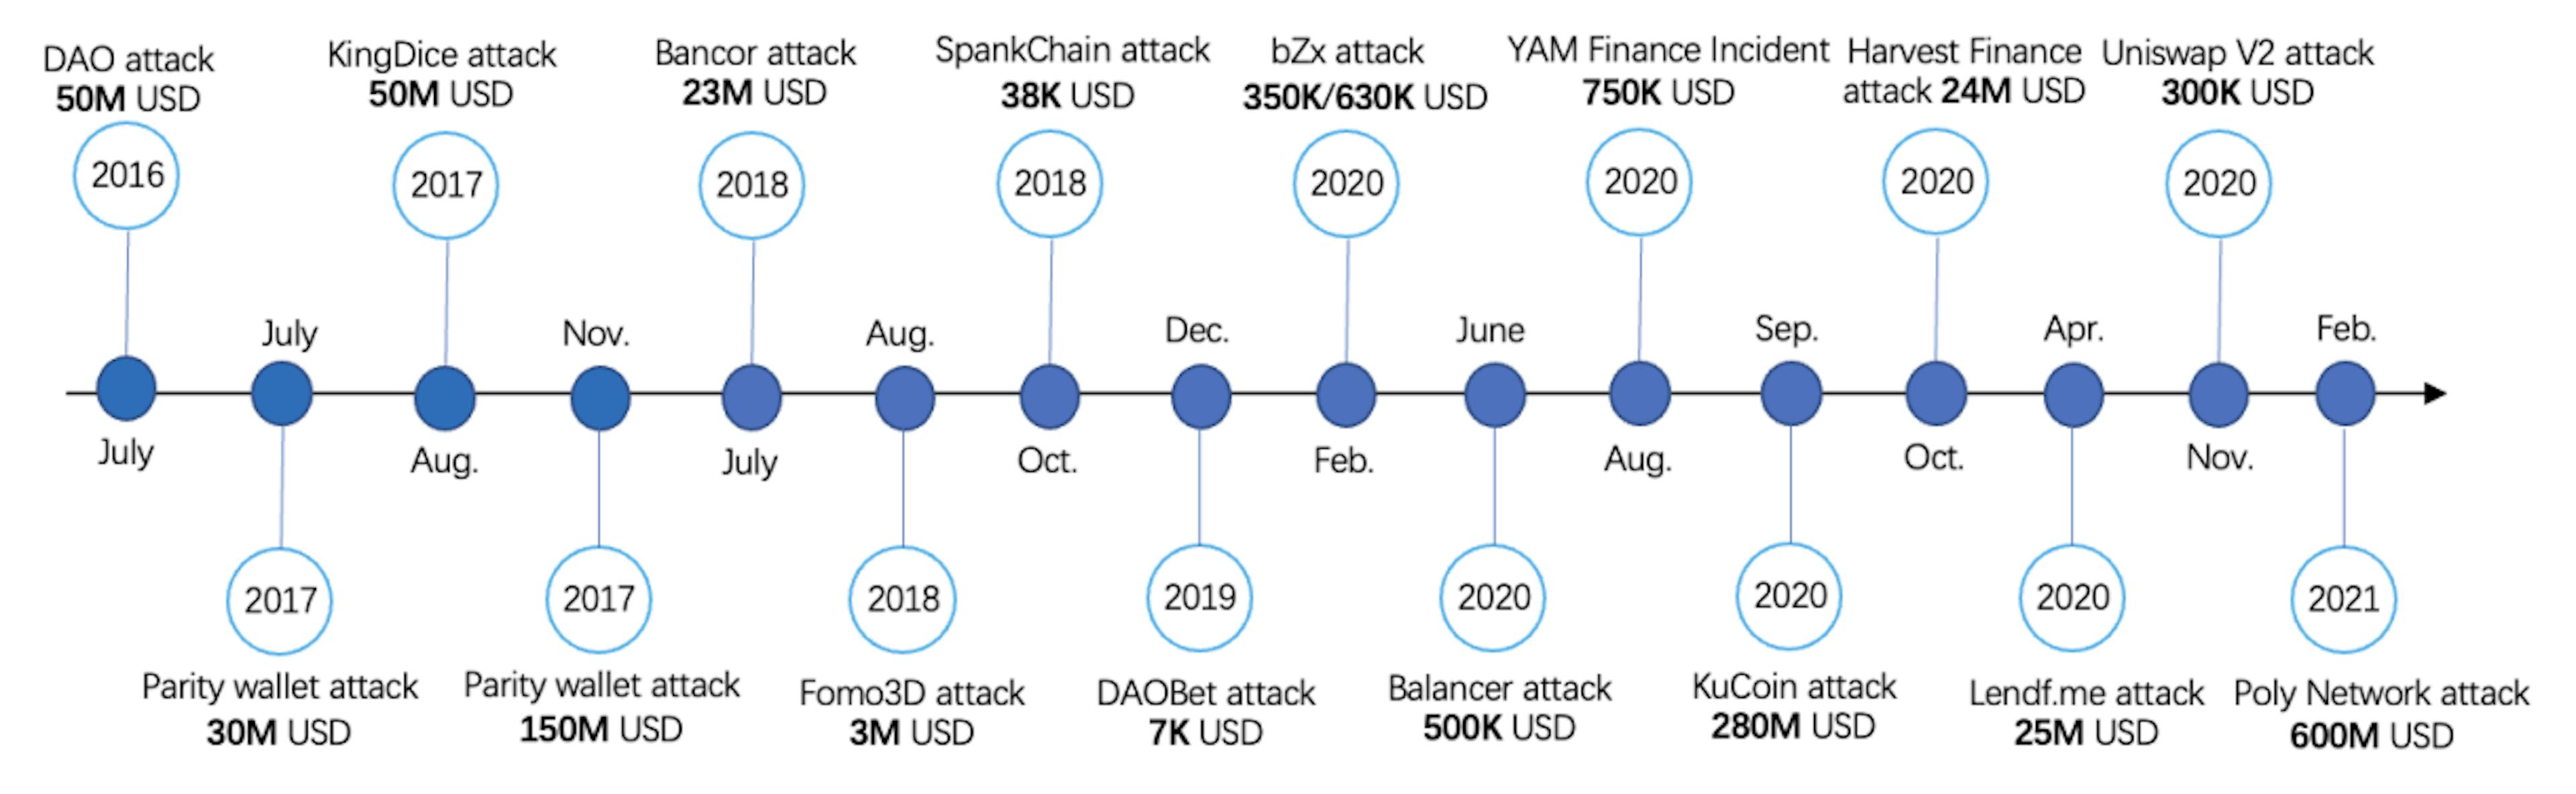 Fig. 4. Several high-profile attacks from 2016 to 2021